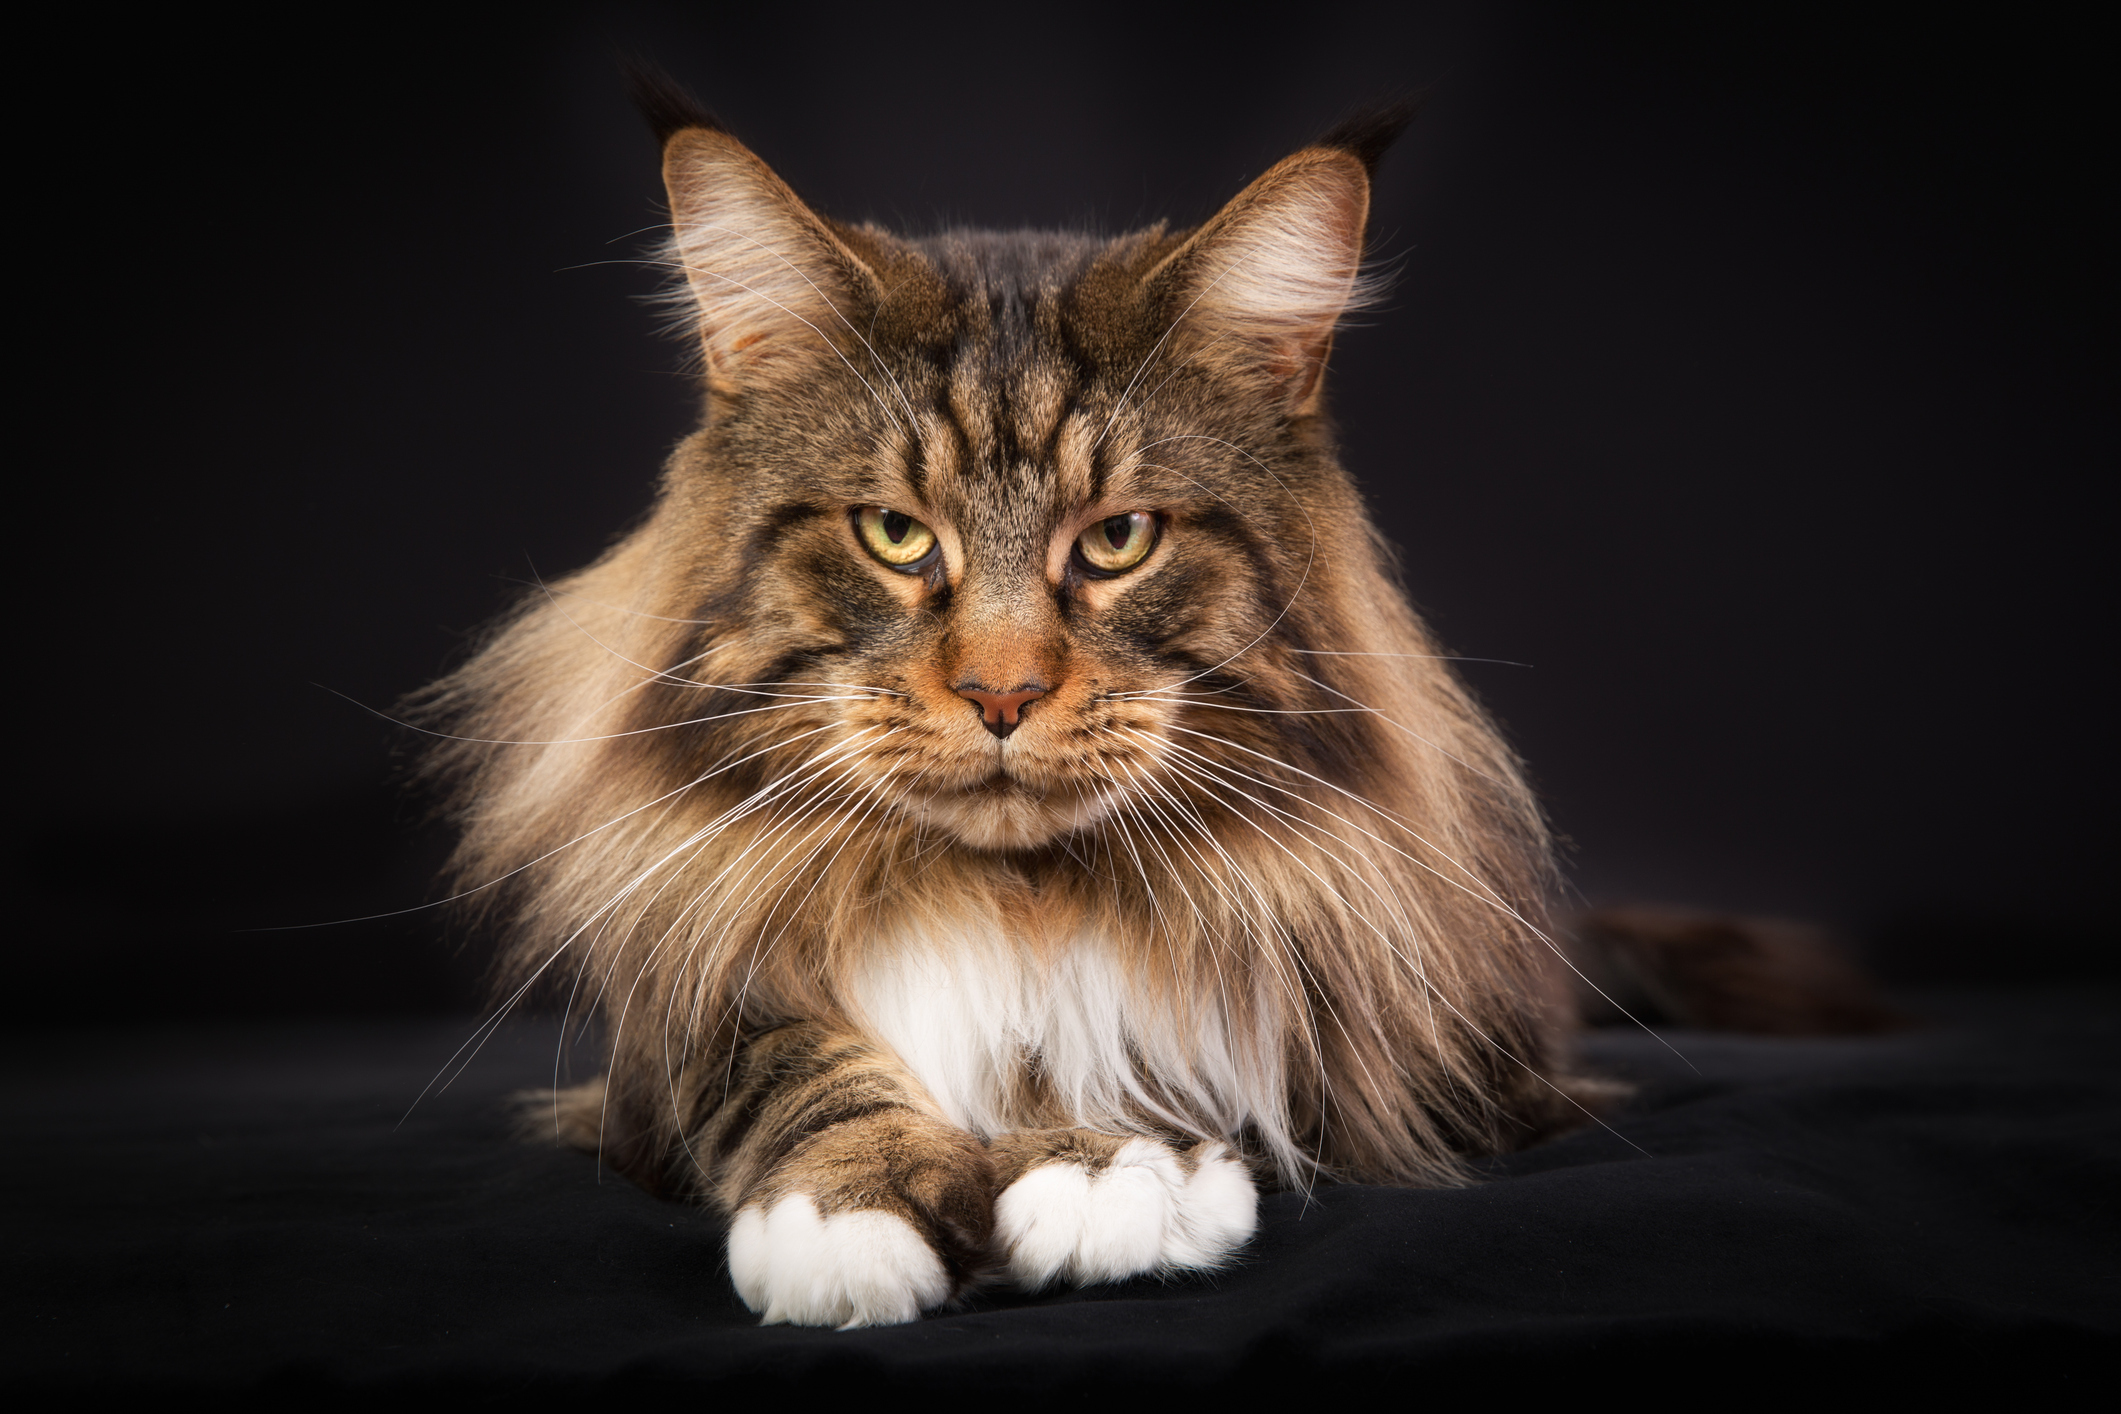 The Marvelous Maine Coon